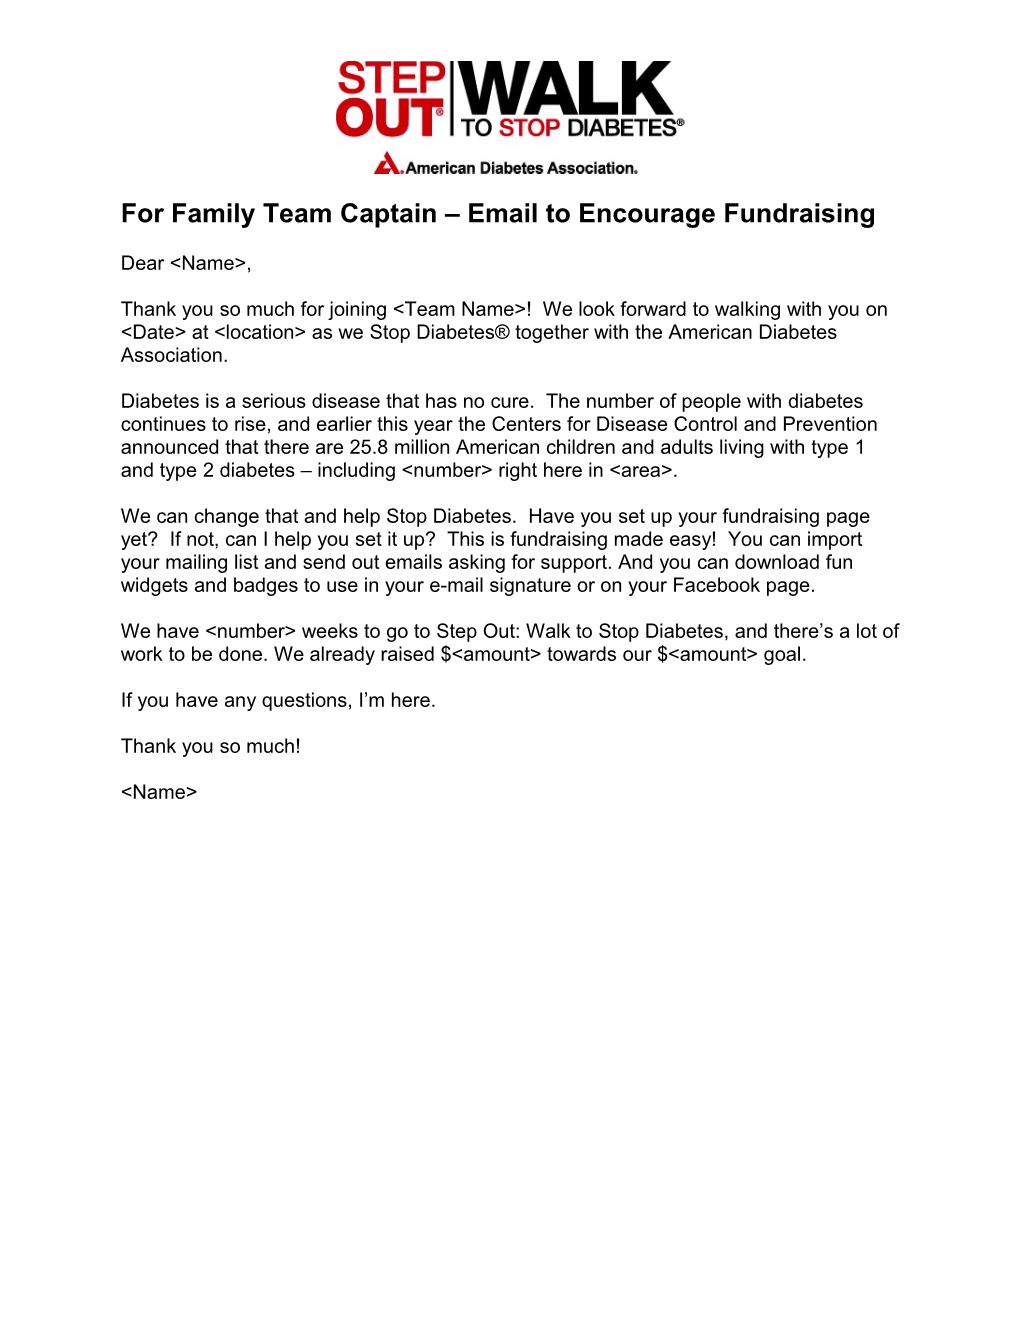 For Family Team Captain Email to Encourage Fundraising